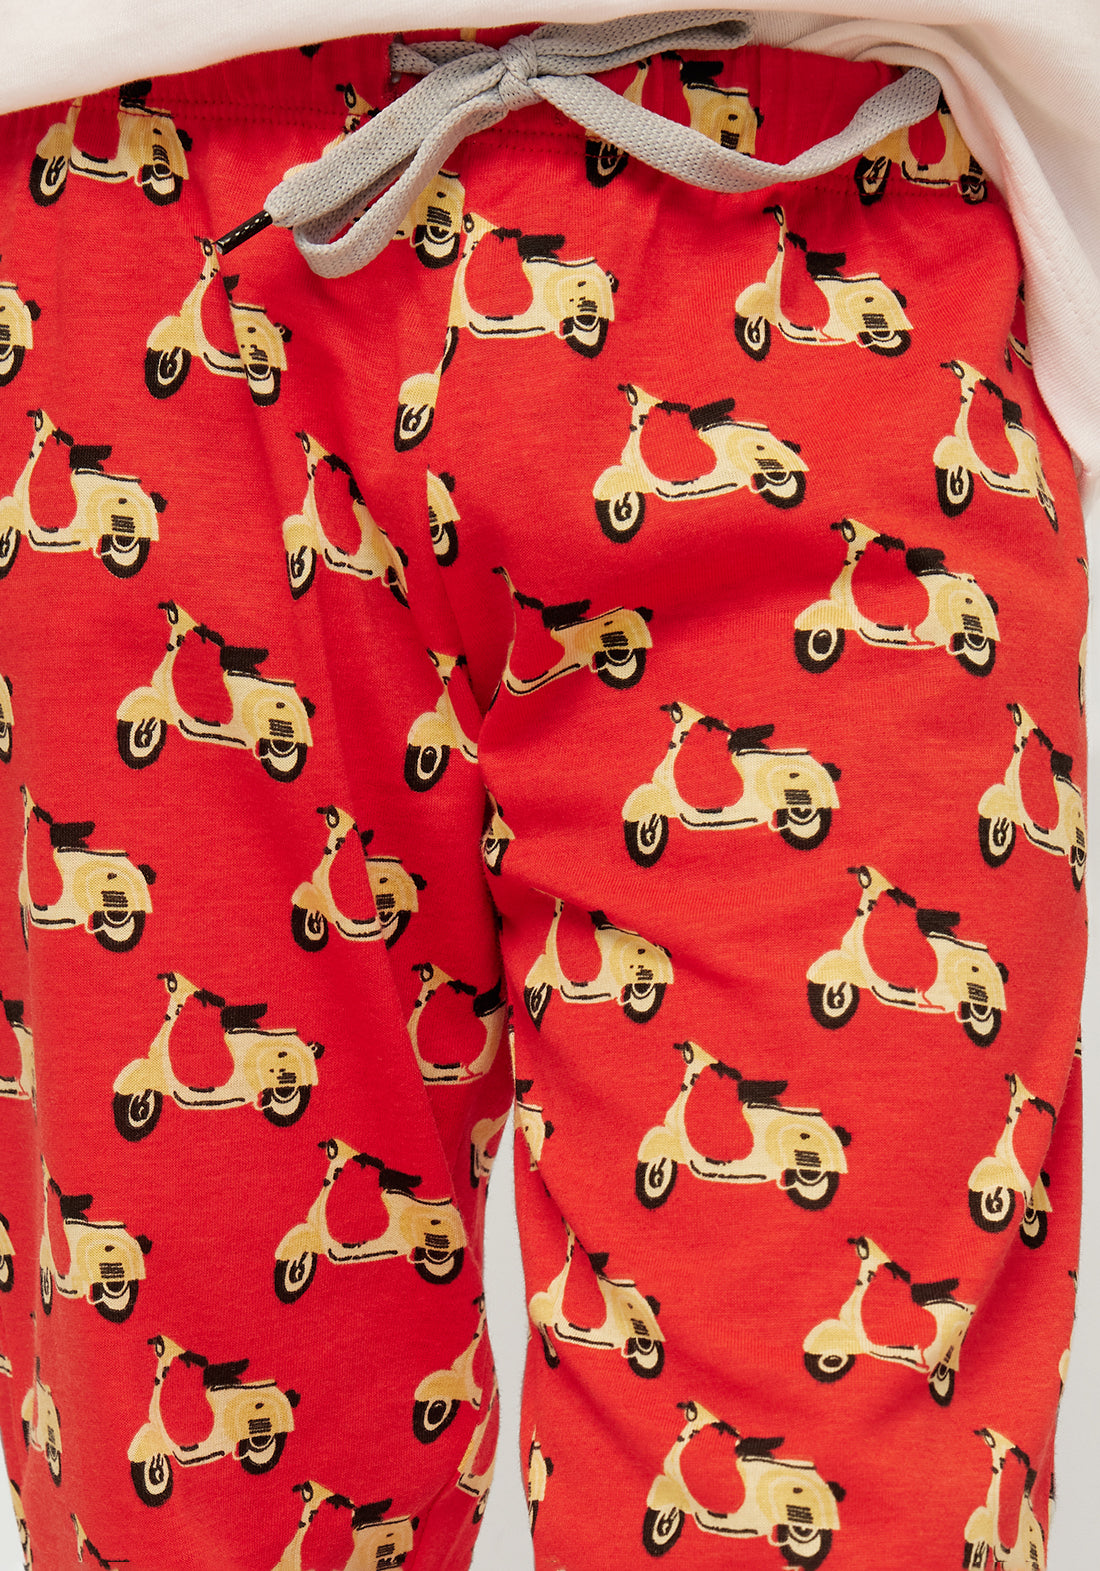 RED, YELLOW AND BLACK SCOOTER PRINT KNITTED PANTS